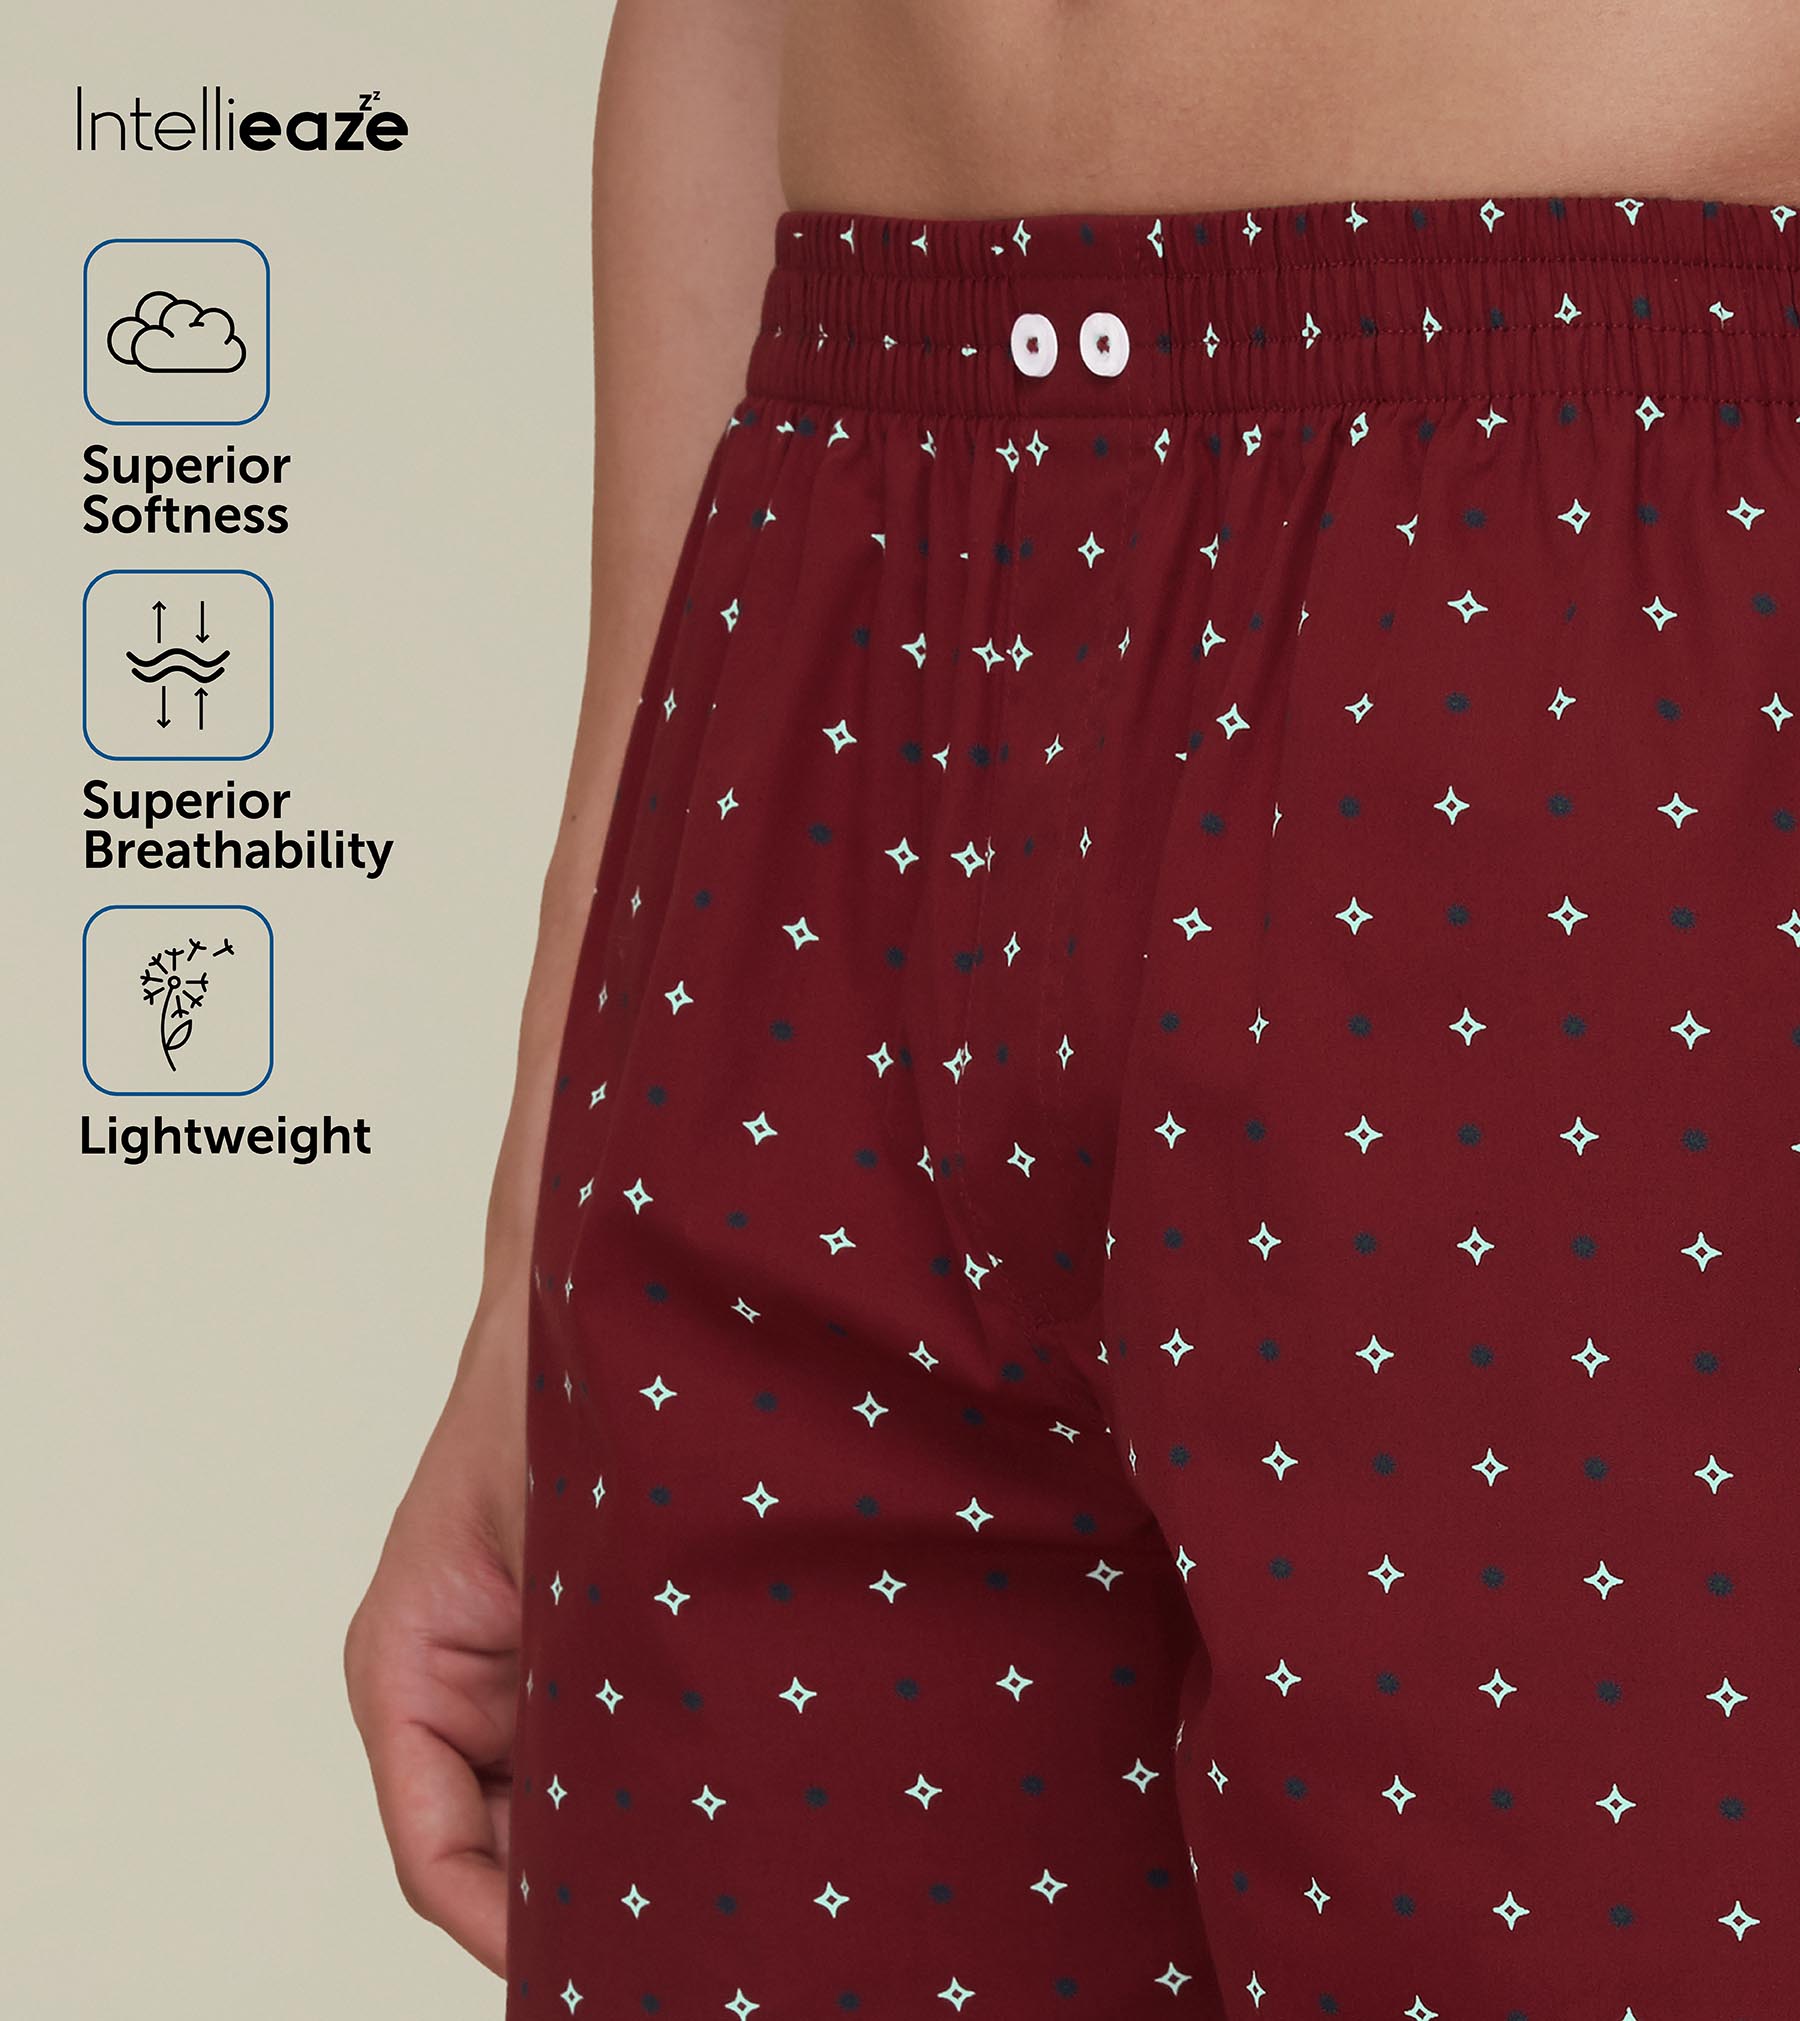 Astor Combed Cotton Boxer Shorts For Men Starry Maroon - XYXX Mens Apparels